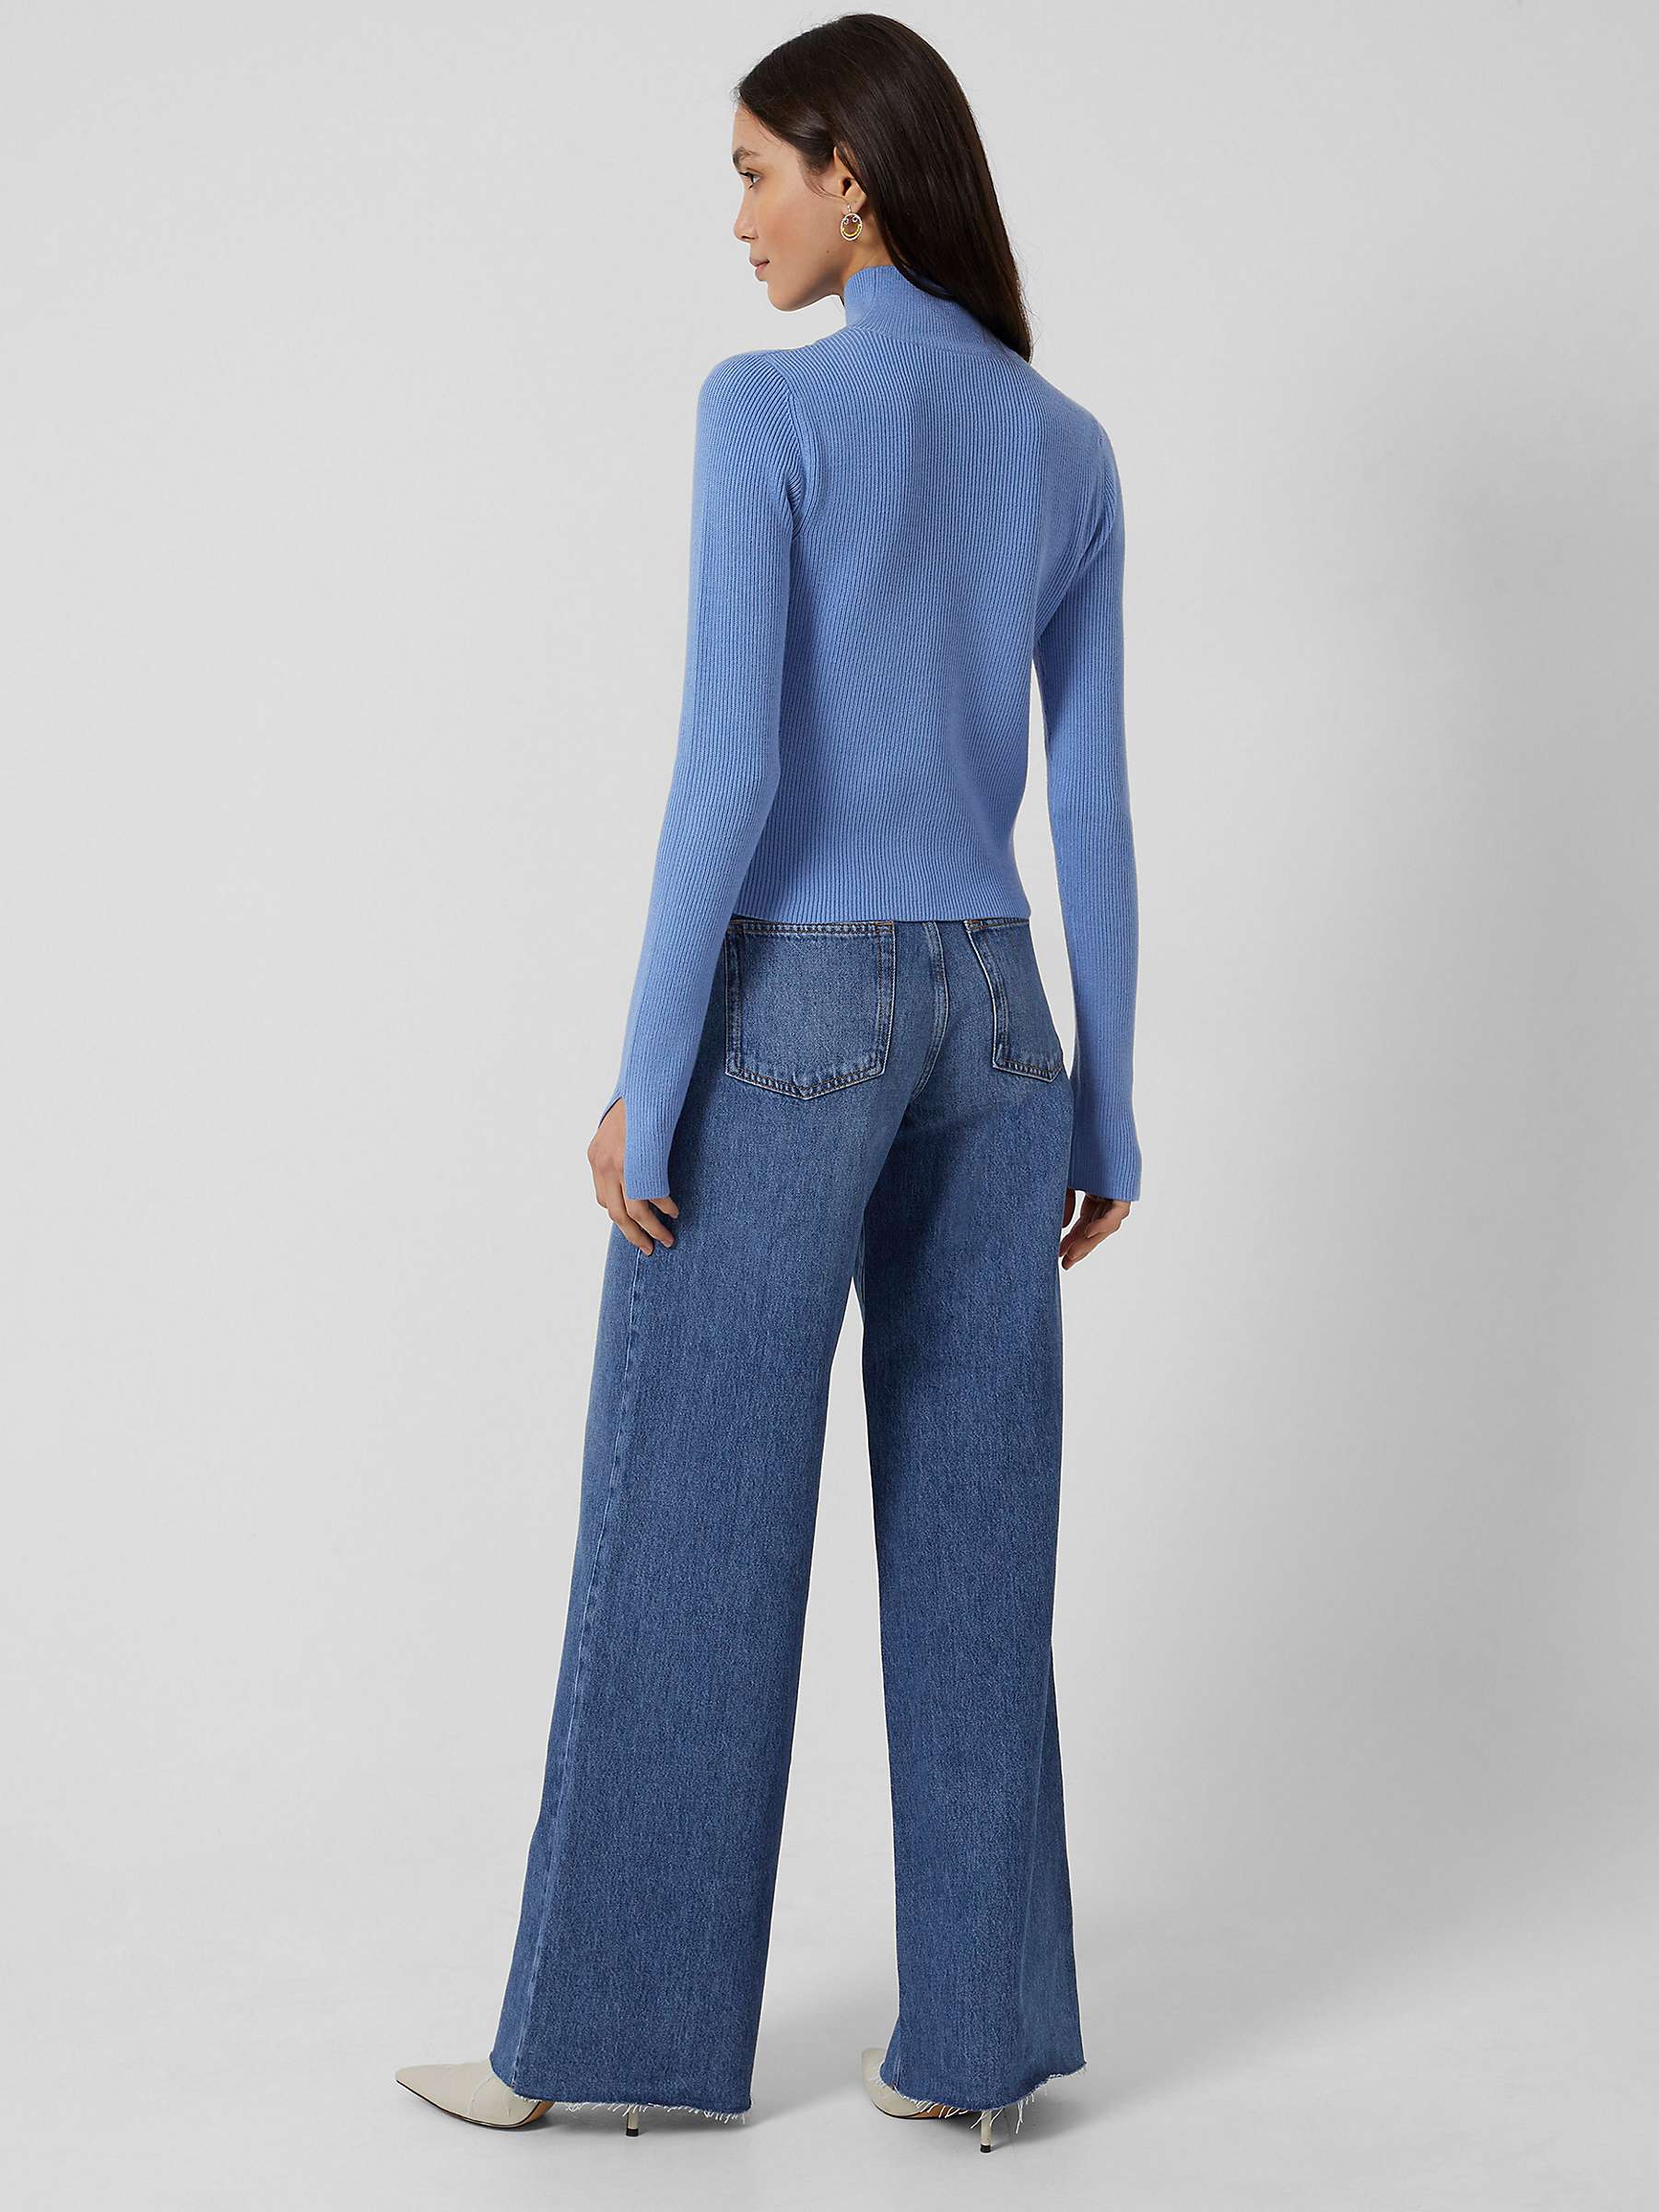 Buy French Connection Lydia Cut Out Shoulder Jumper, Ultramarine Online at johnlewis.com